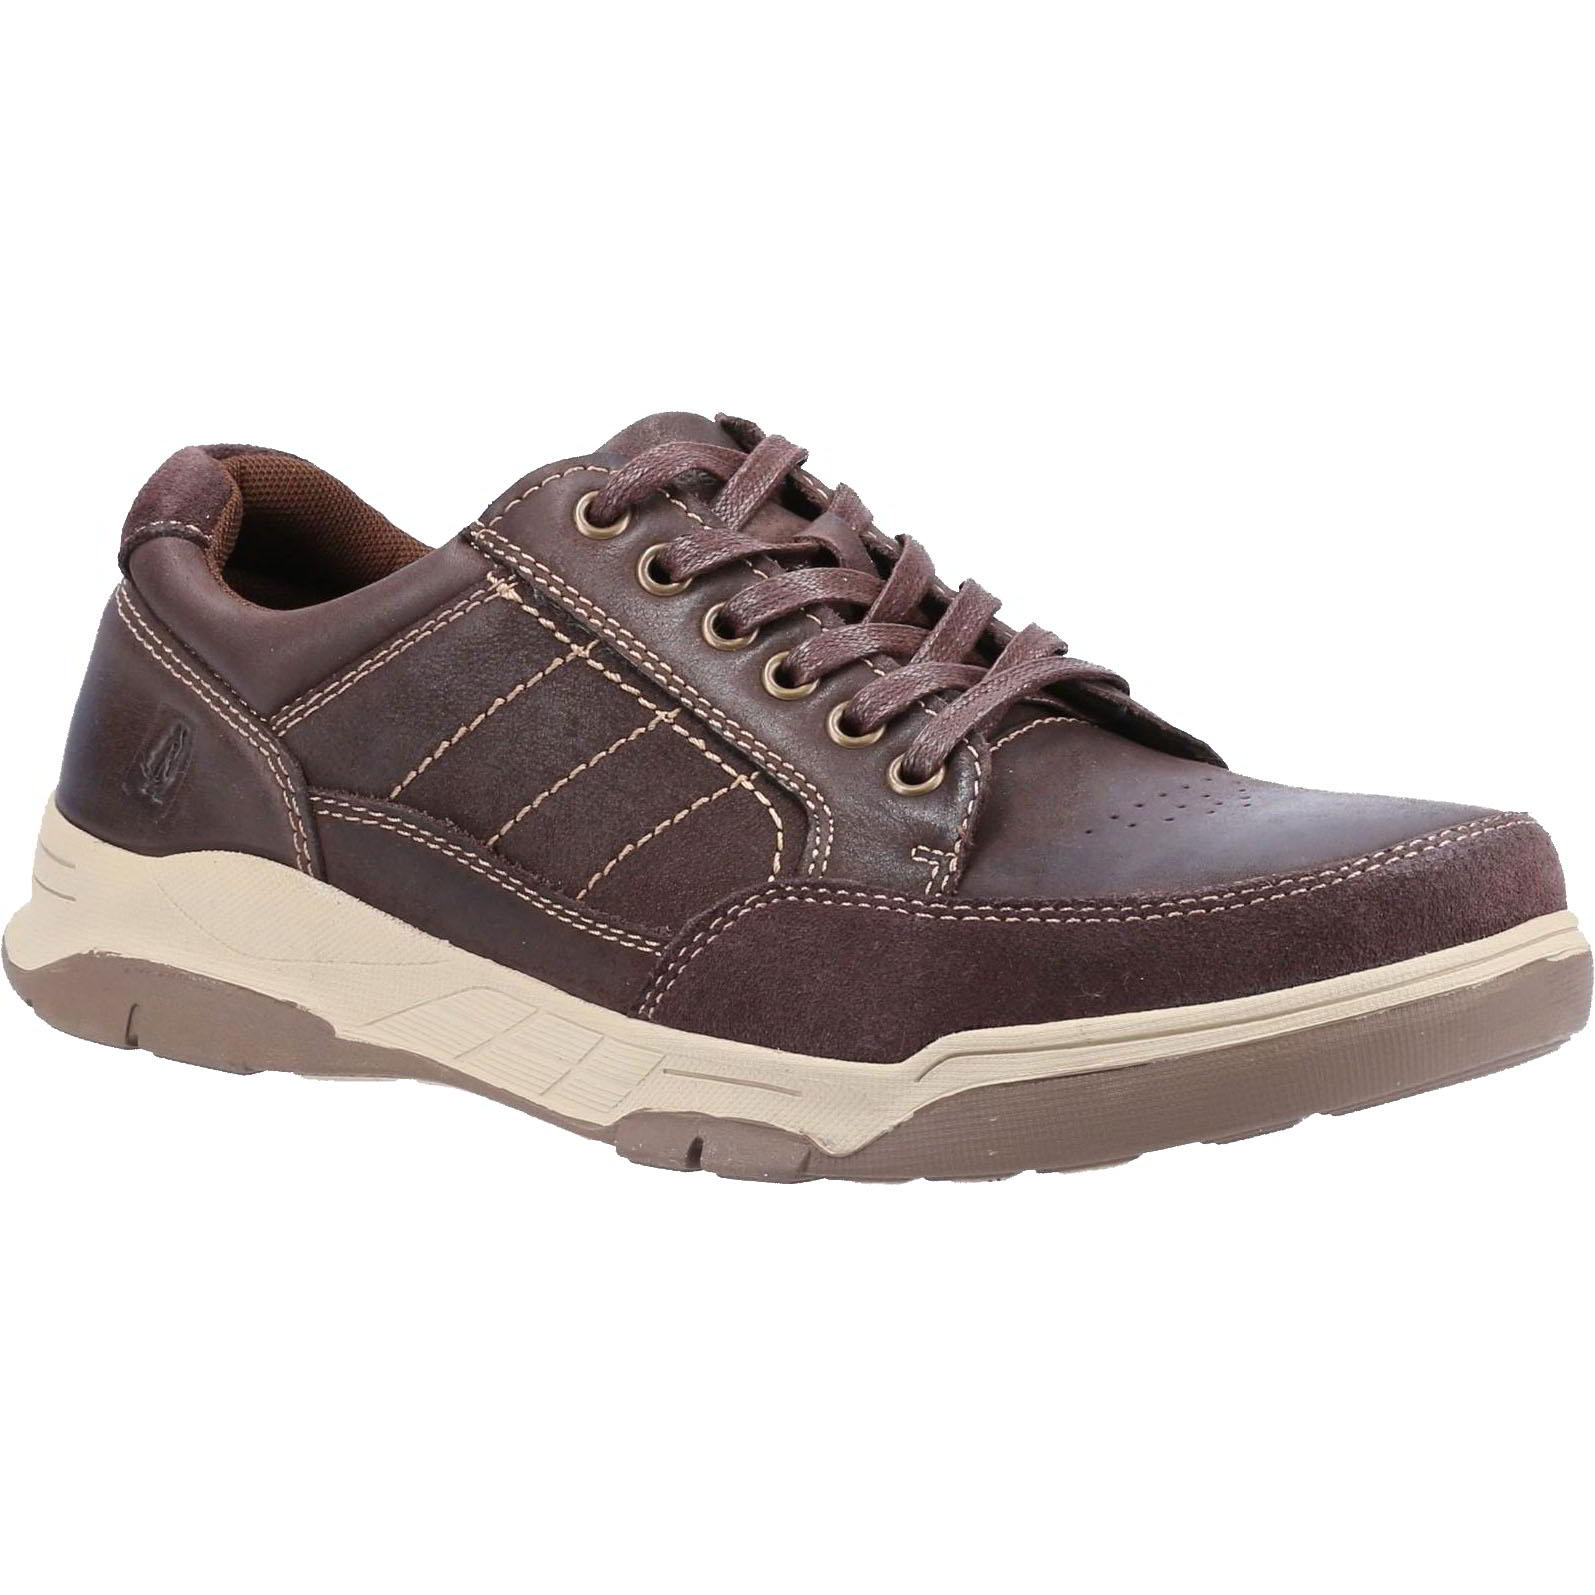 Hush Puppies Men's Finley Wide Fit Shoes Trainers - UK 10